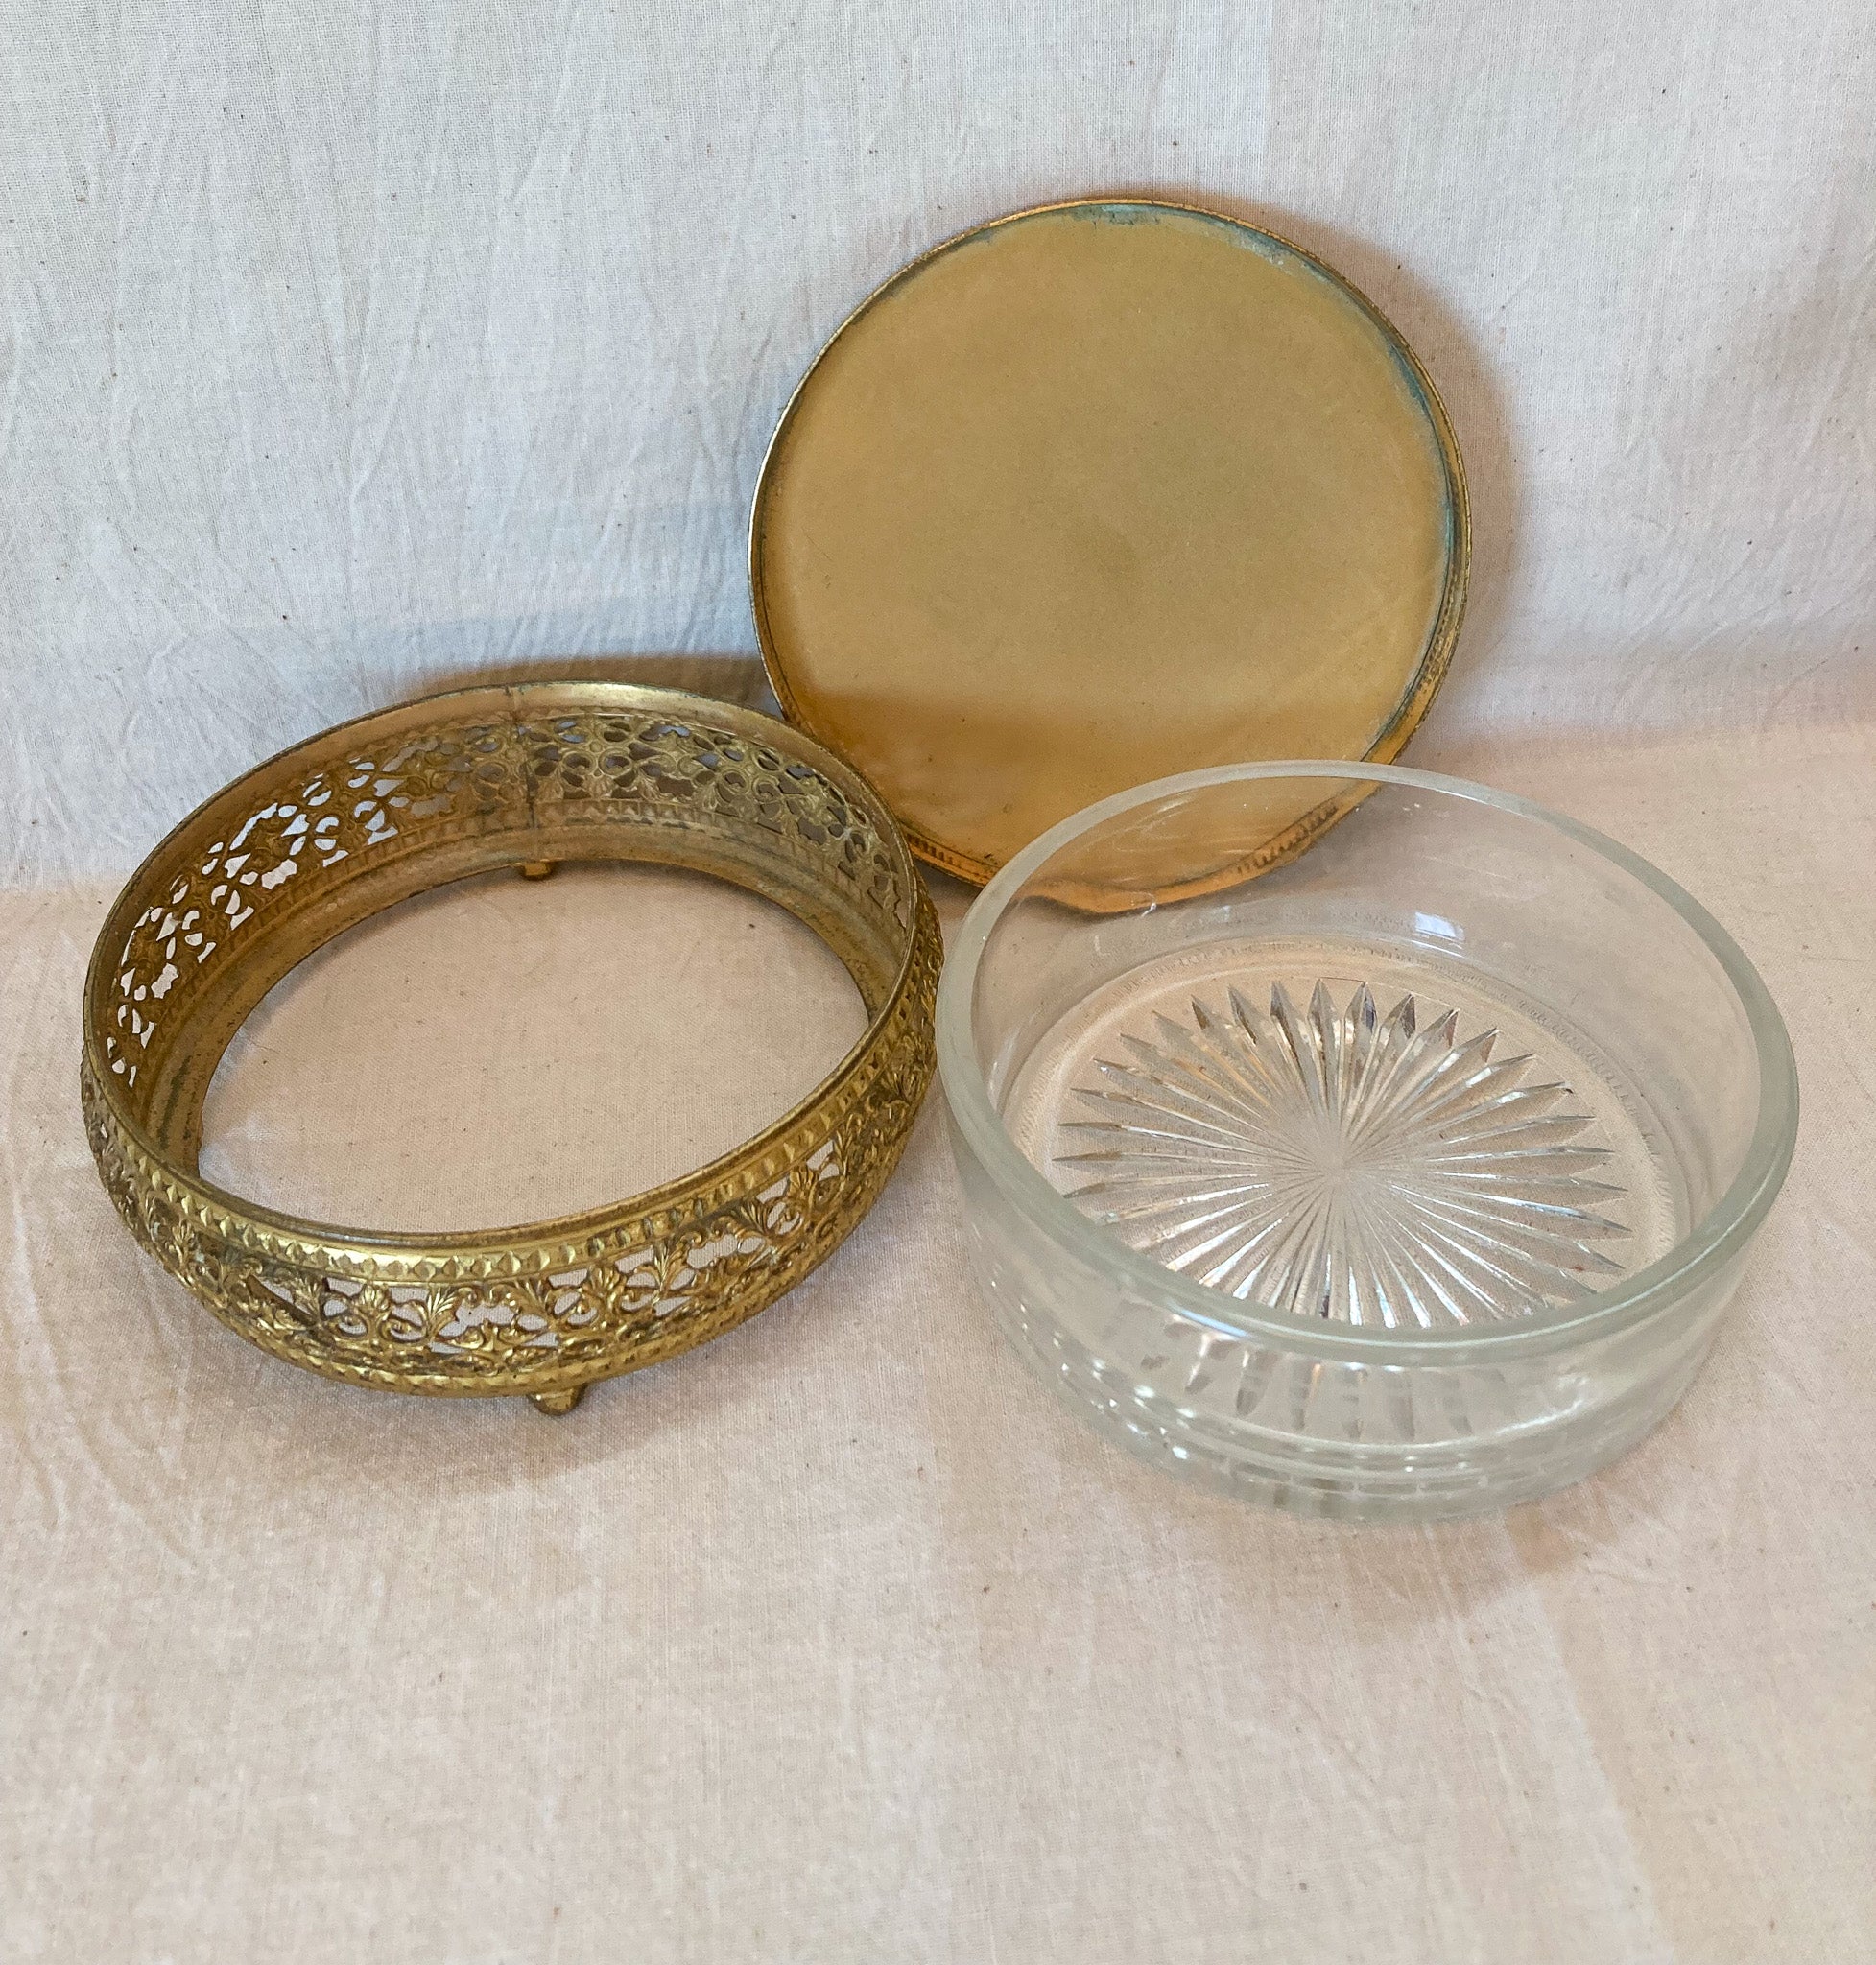 1920’s – 1930’s Glass and Brass Vanity/Powder Box and 1950's Kigu London Compact